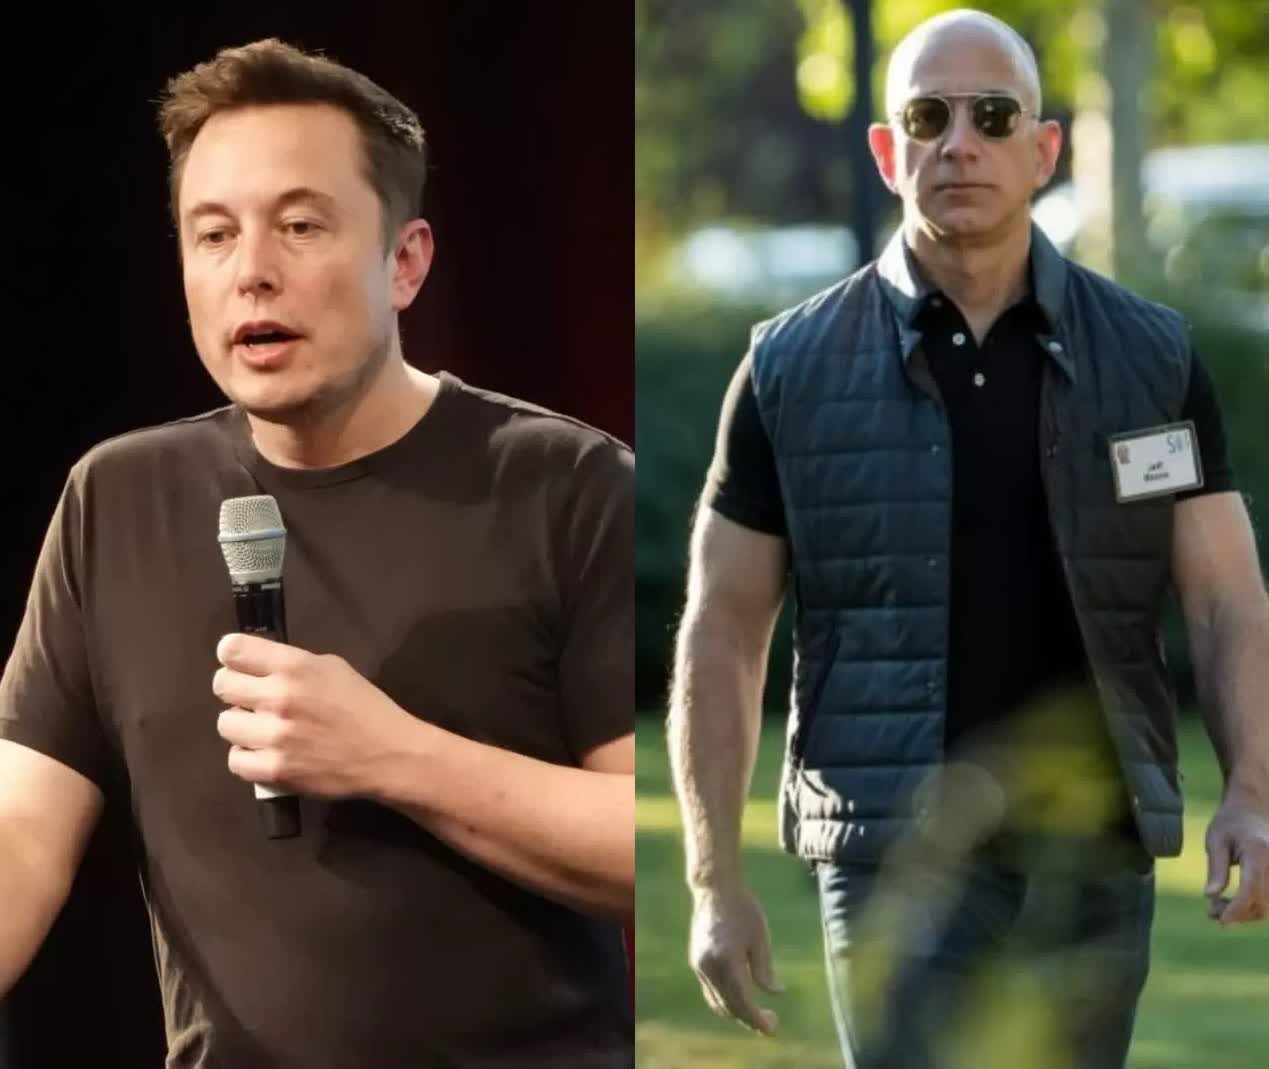 Report shows how billionaires including Jeff Bezos and Elon Musk pay little to no taxes